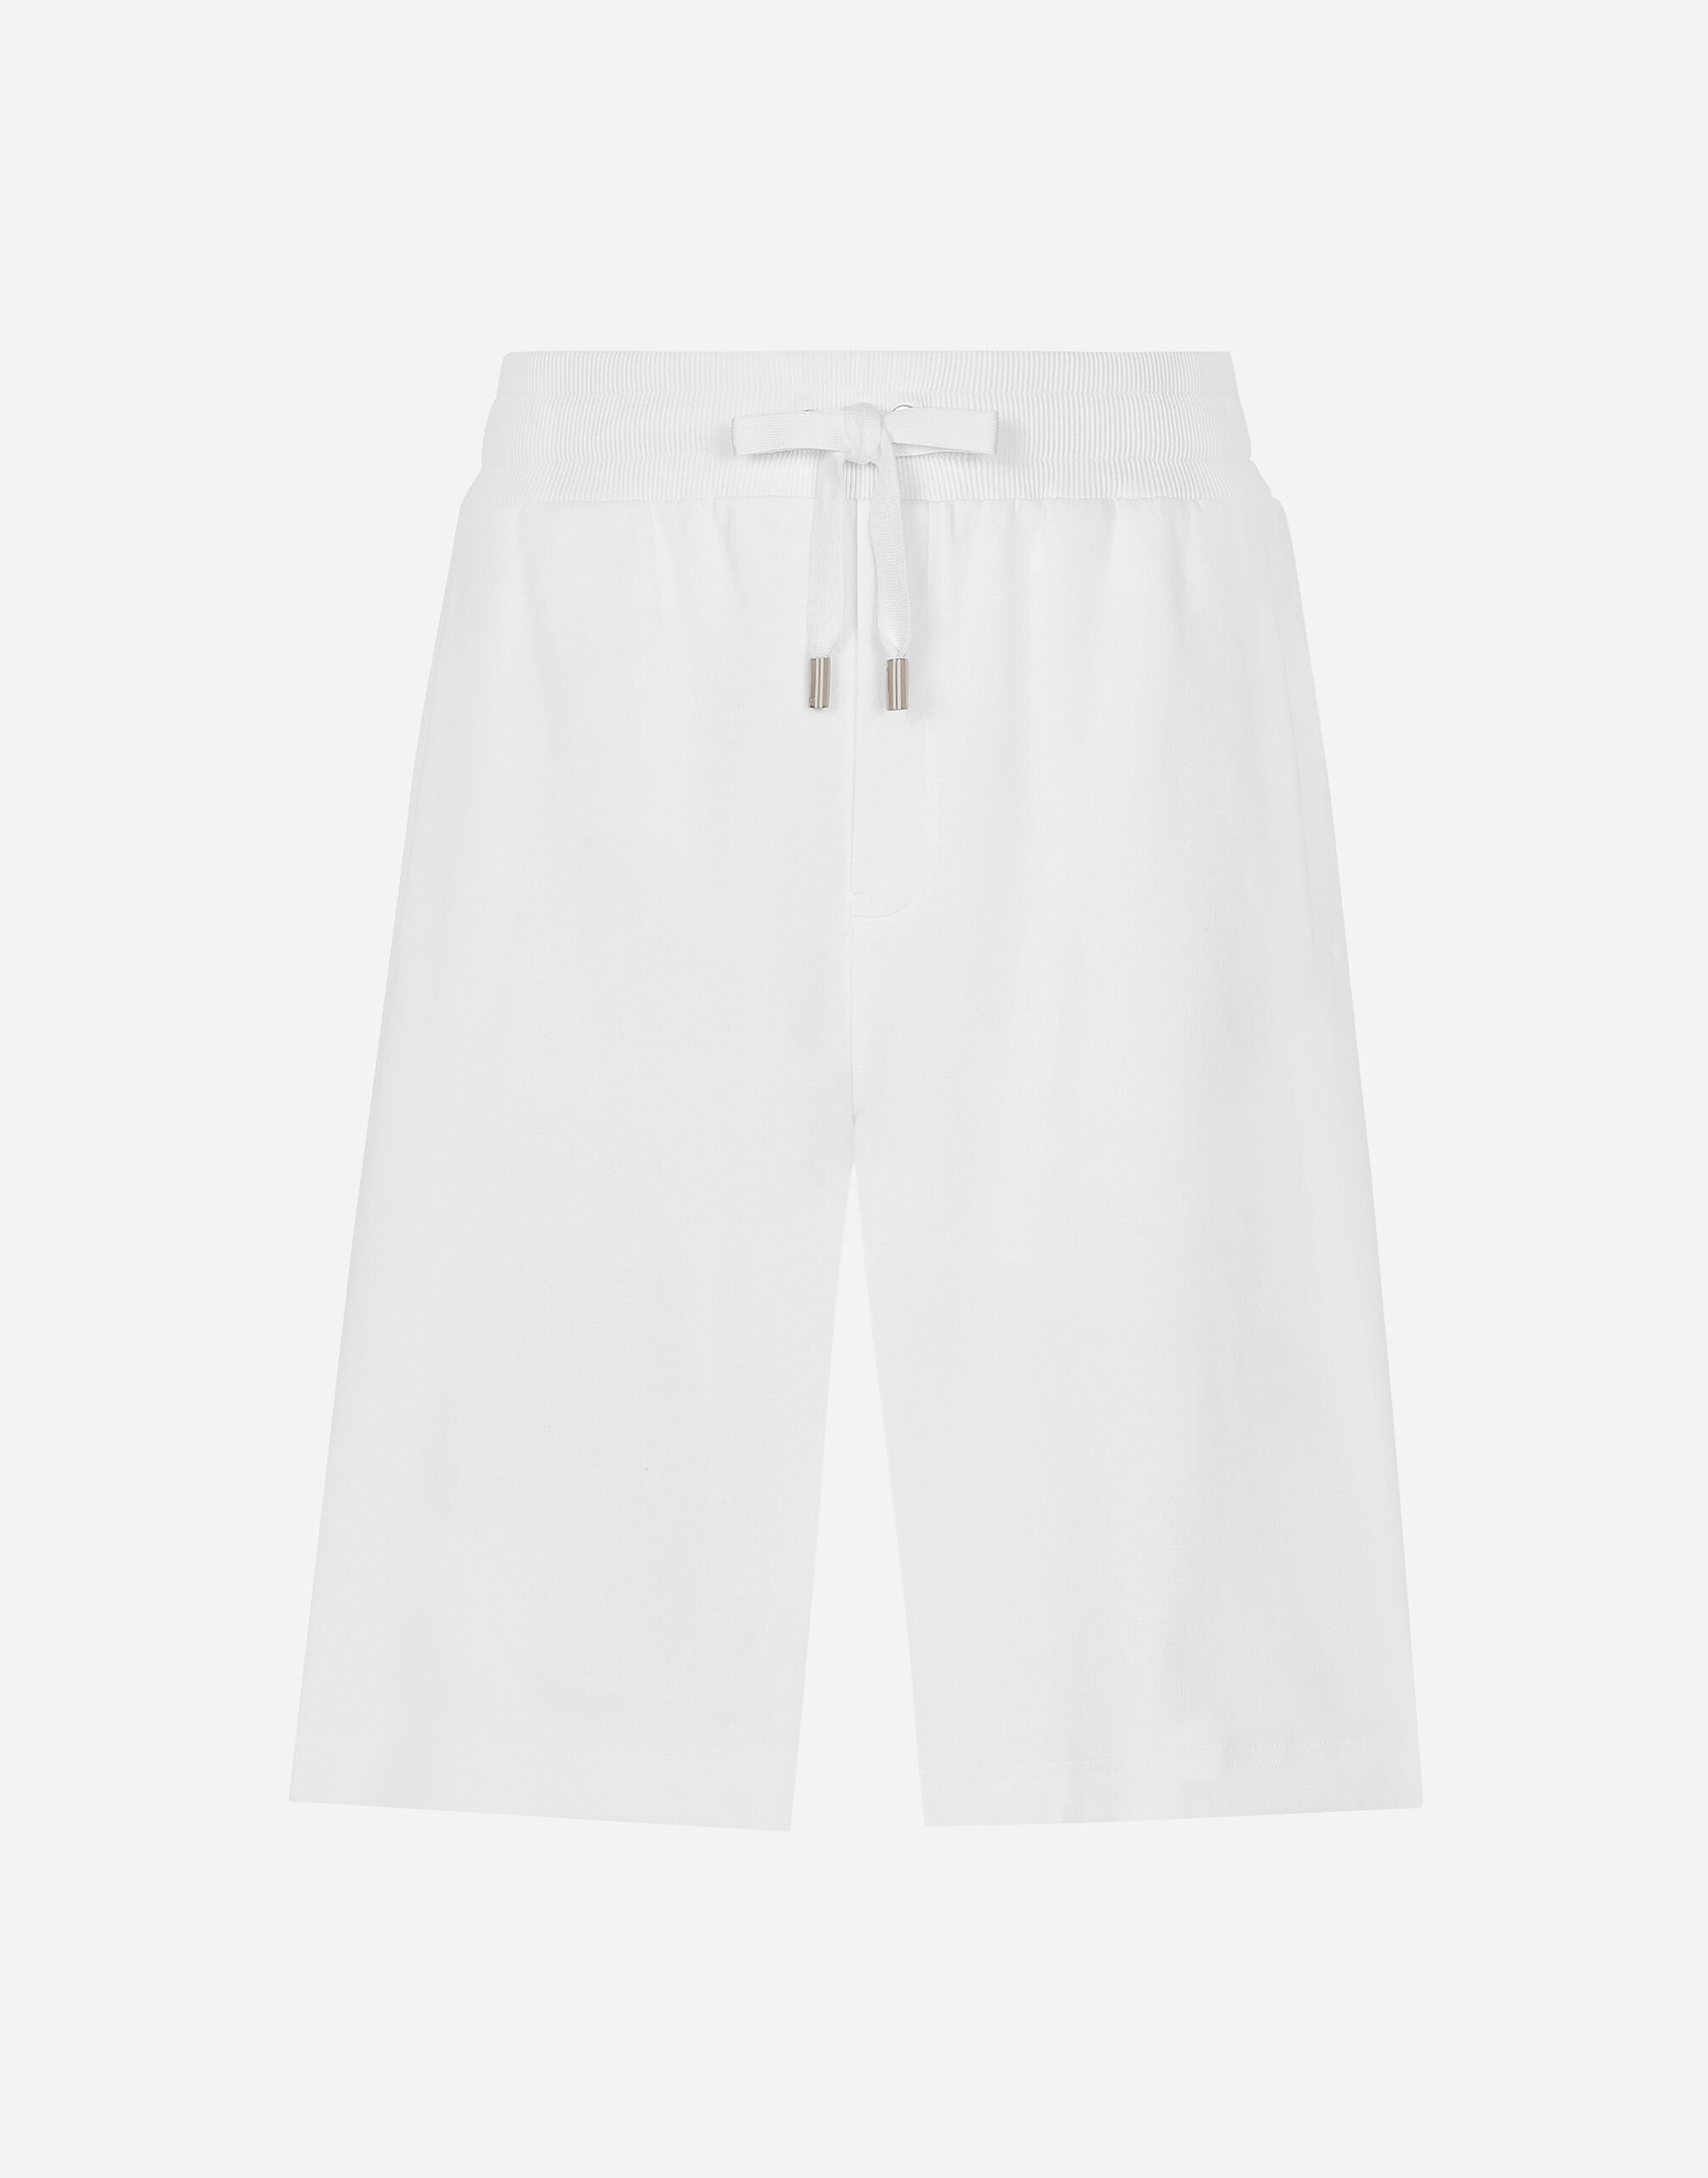 ${brand} Jogging shorts with tag ${colorDescription} ${masterID}